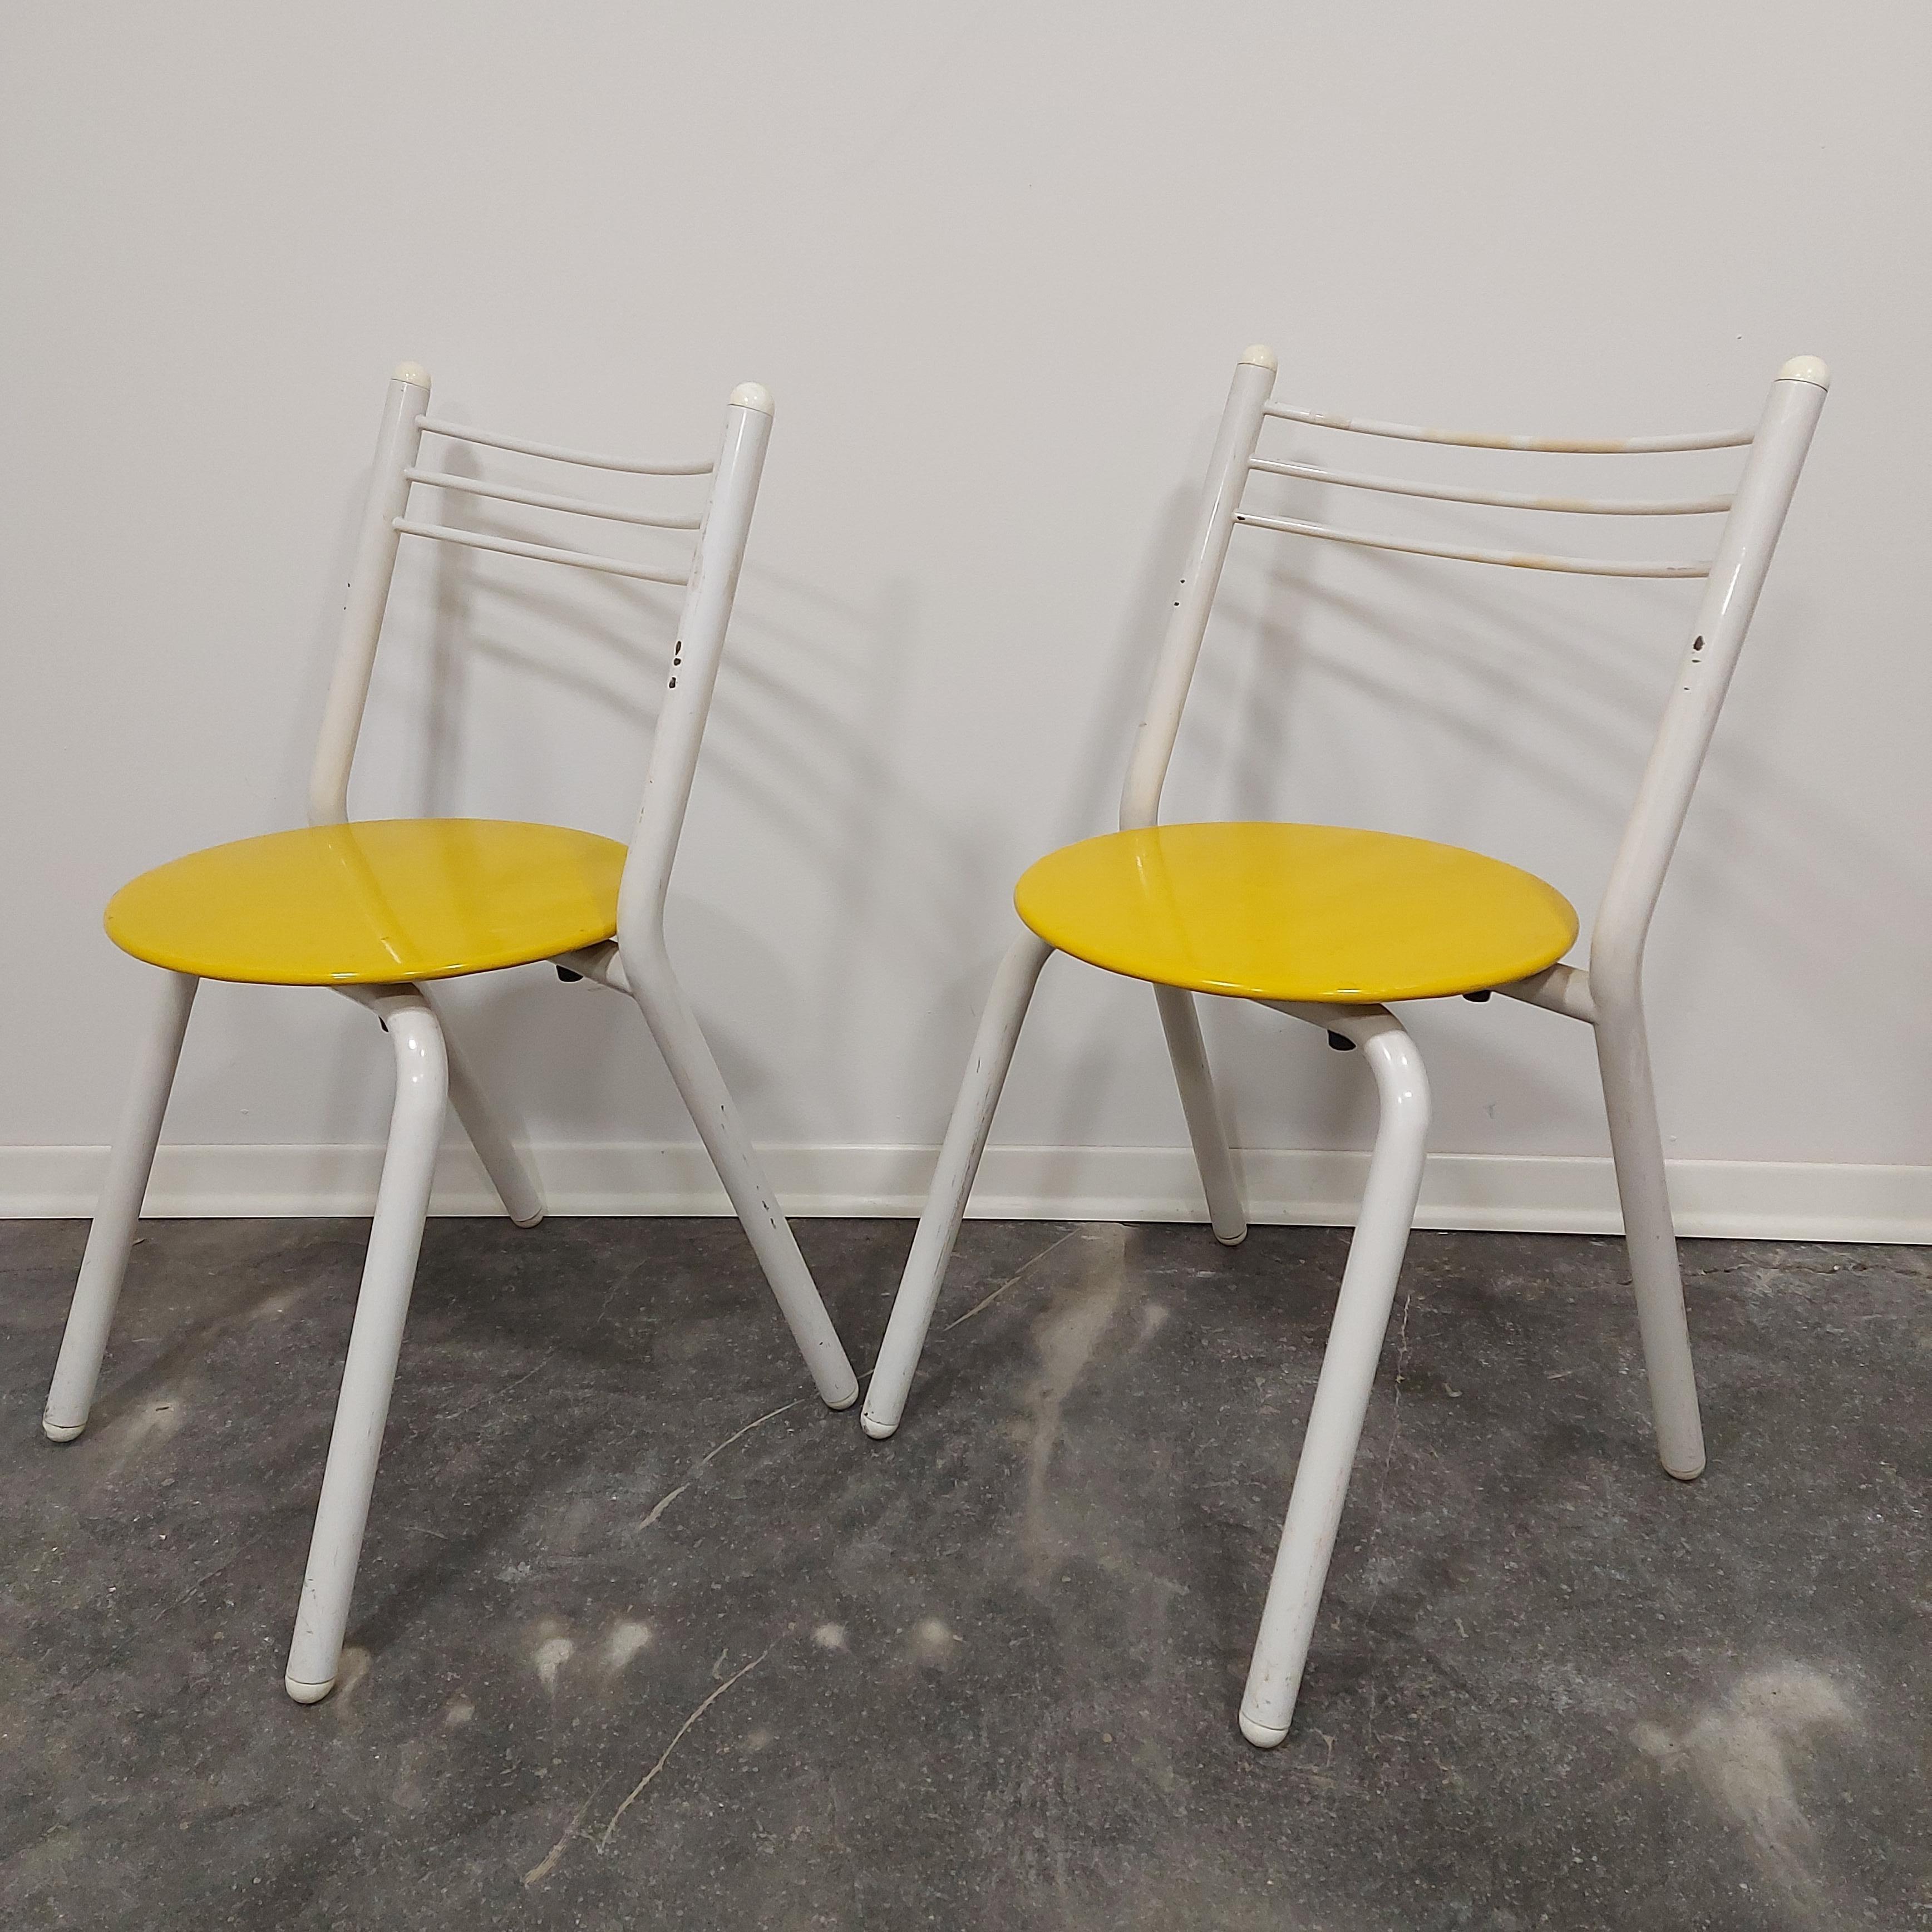 Slovenian Metal chairs 1970s stackable pair For Sale